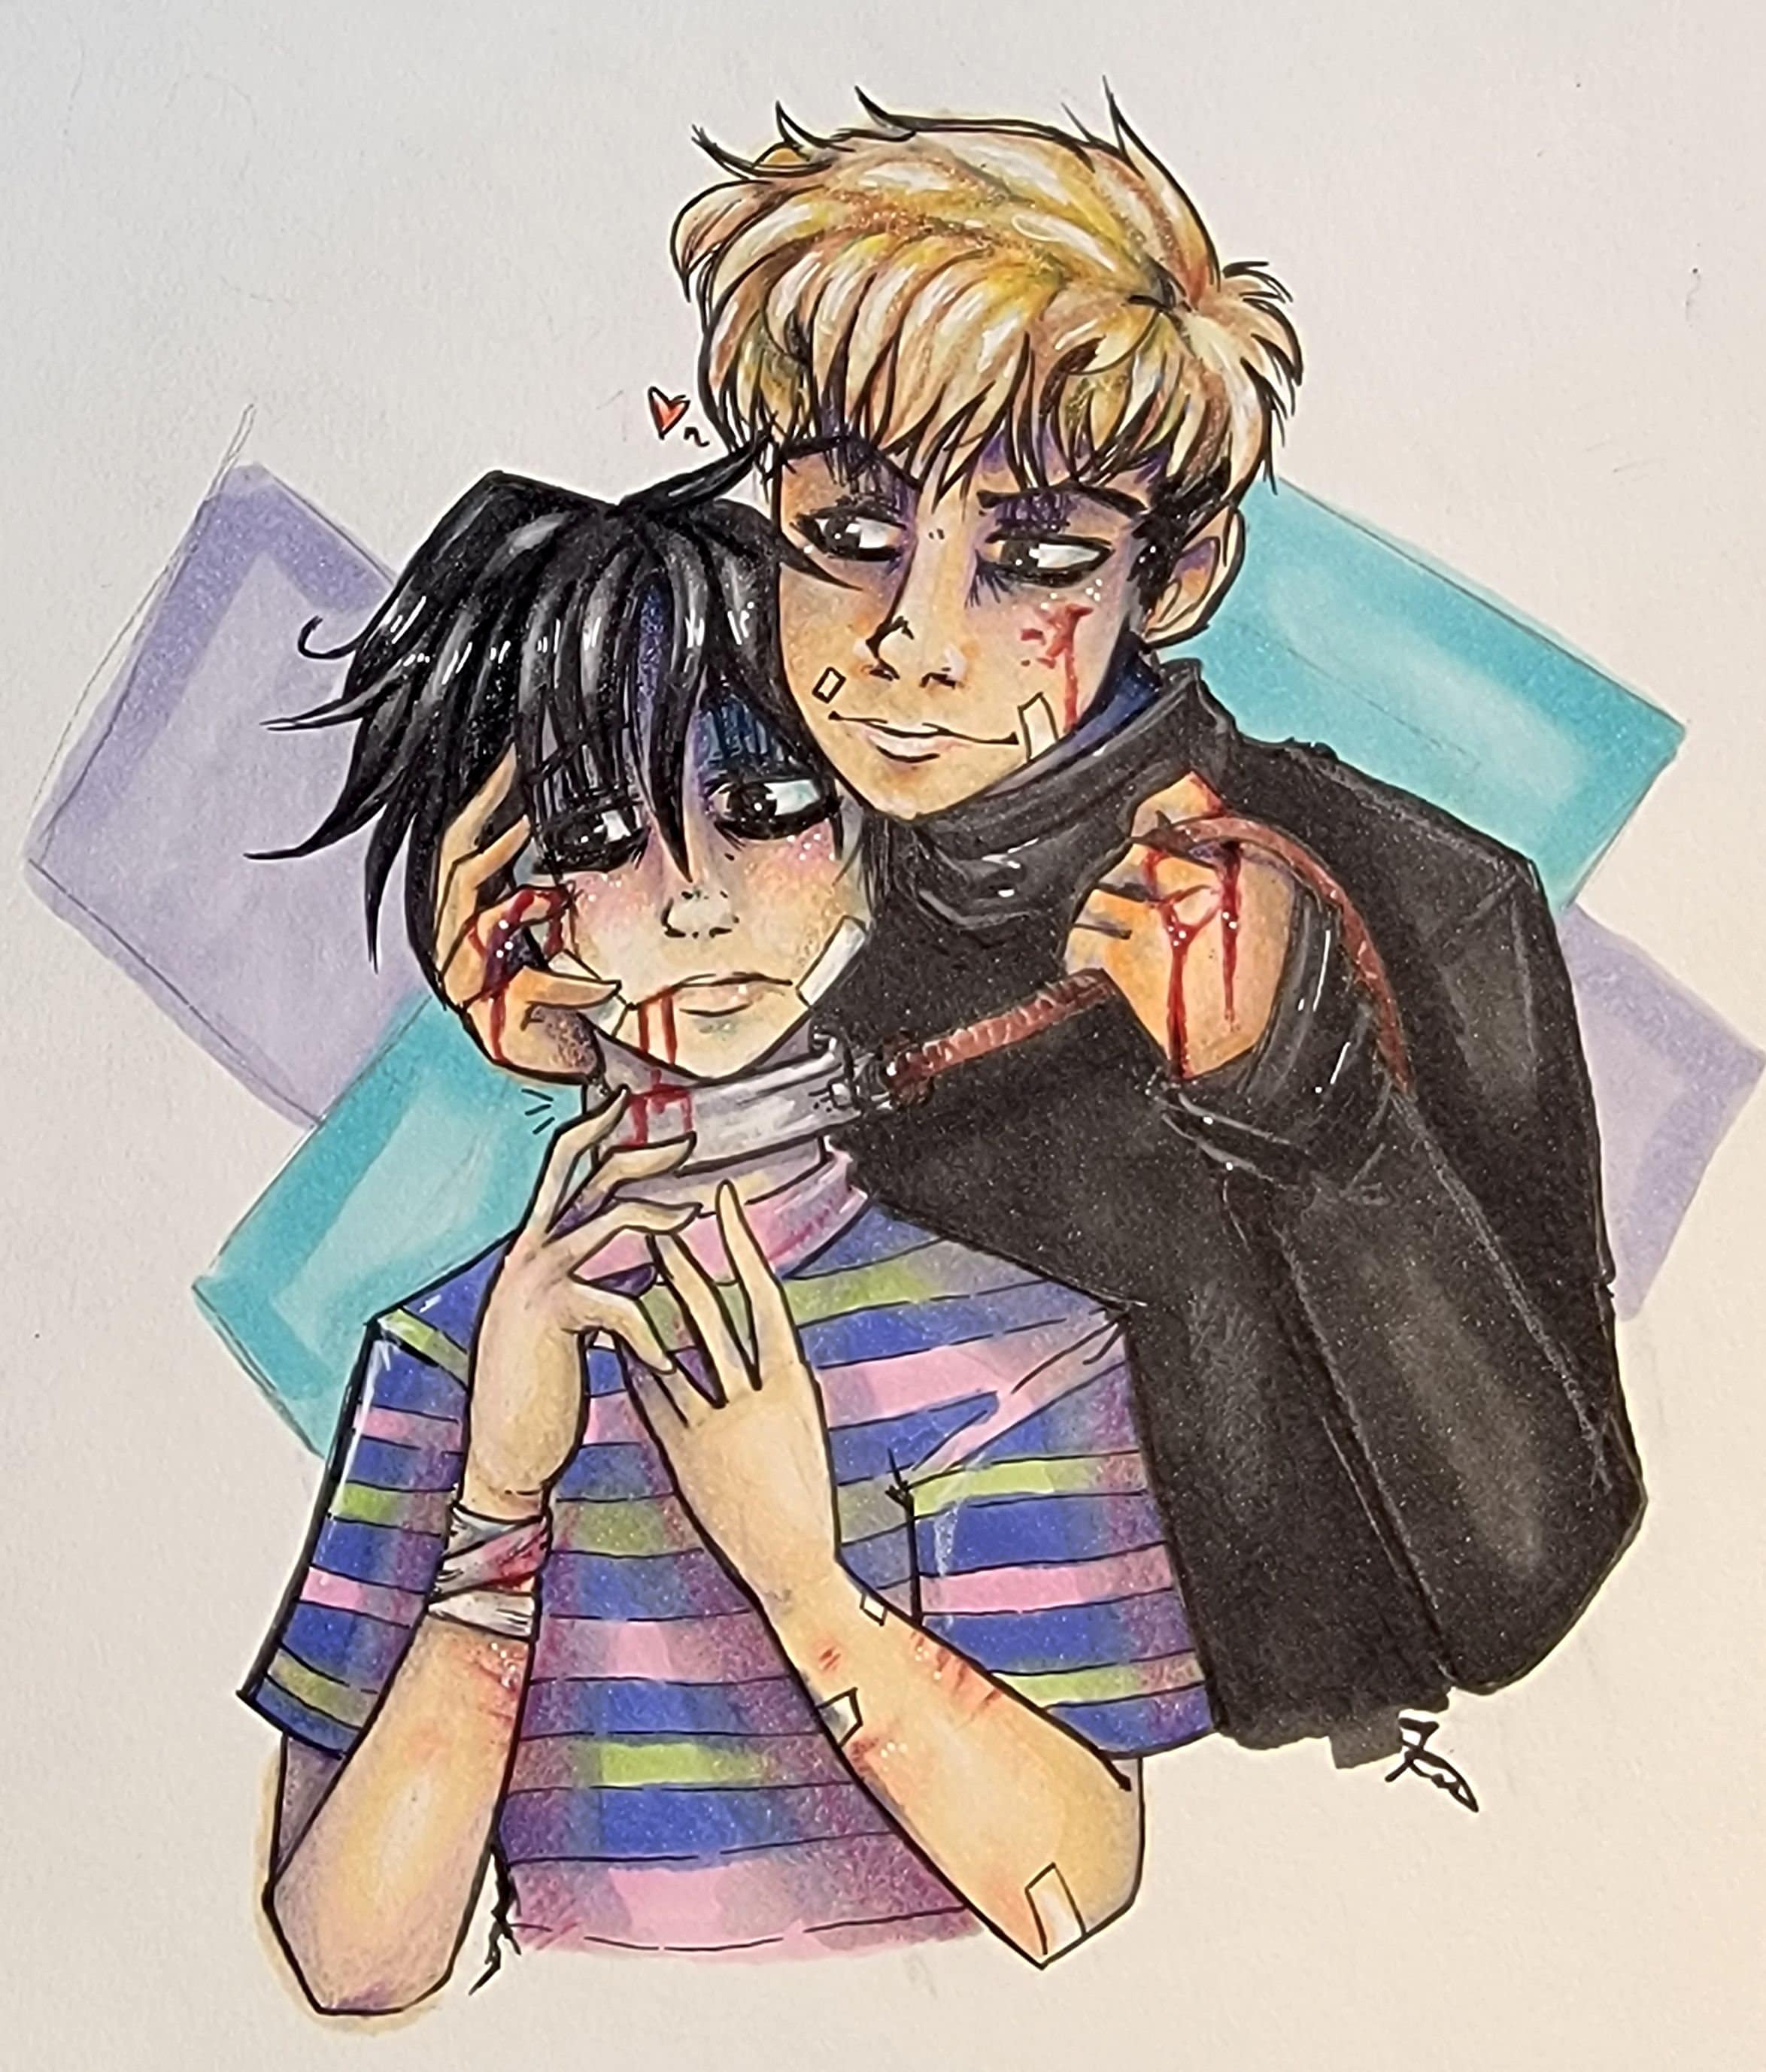 Picture Yoon Bum Art Killing Stalking Anime Gifts Idea Greeting